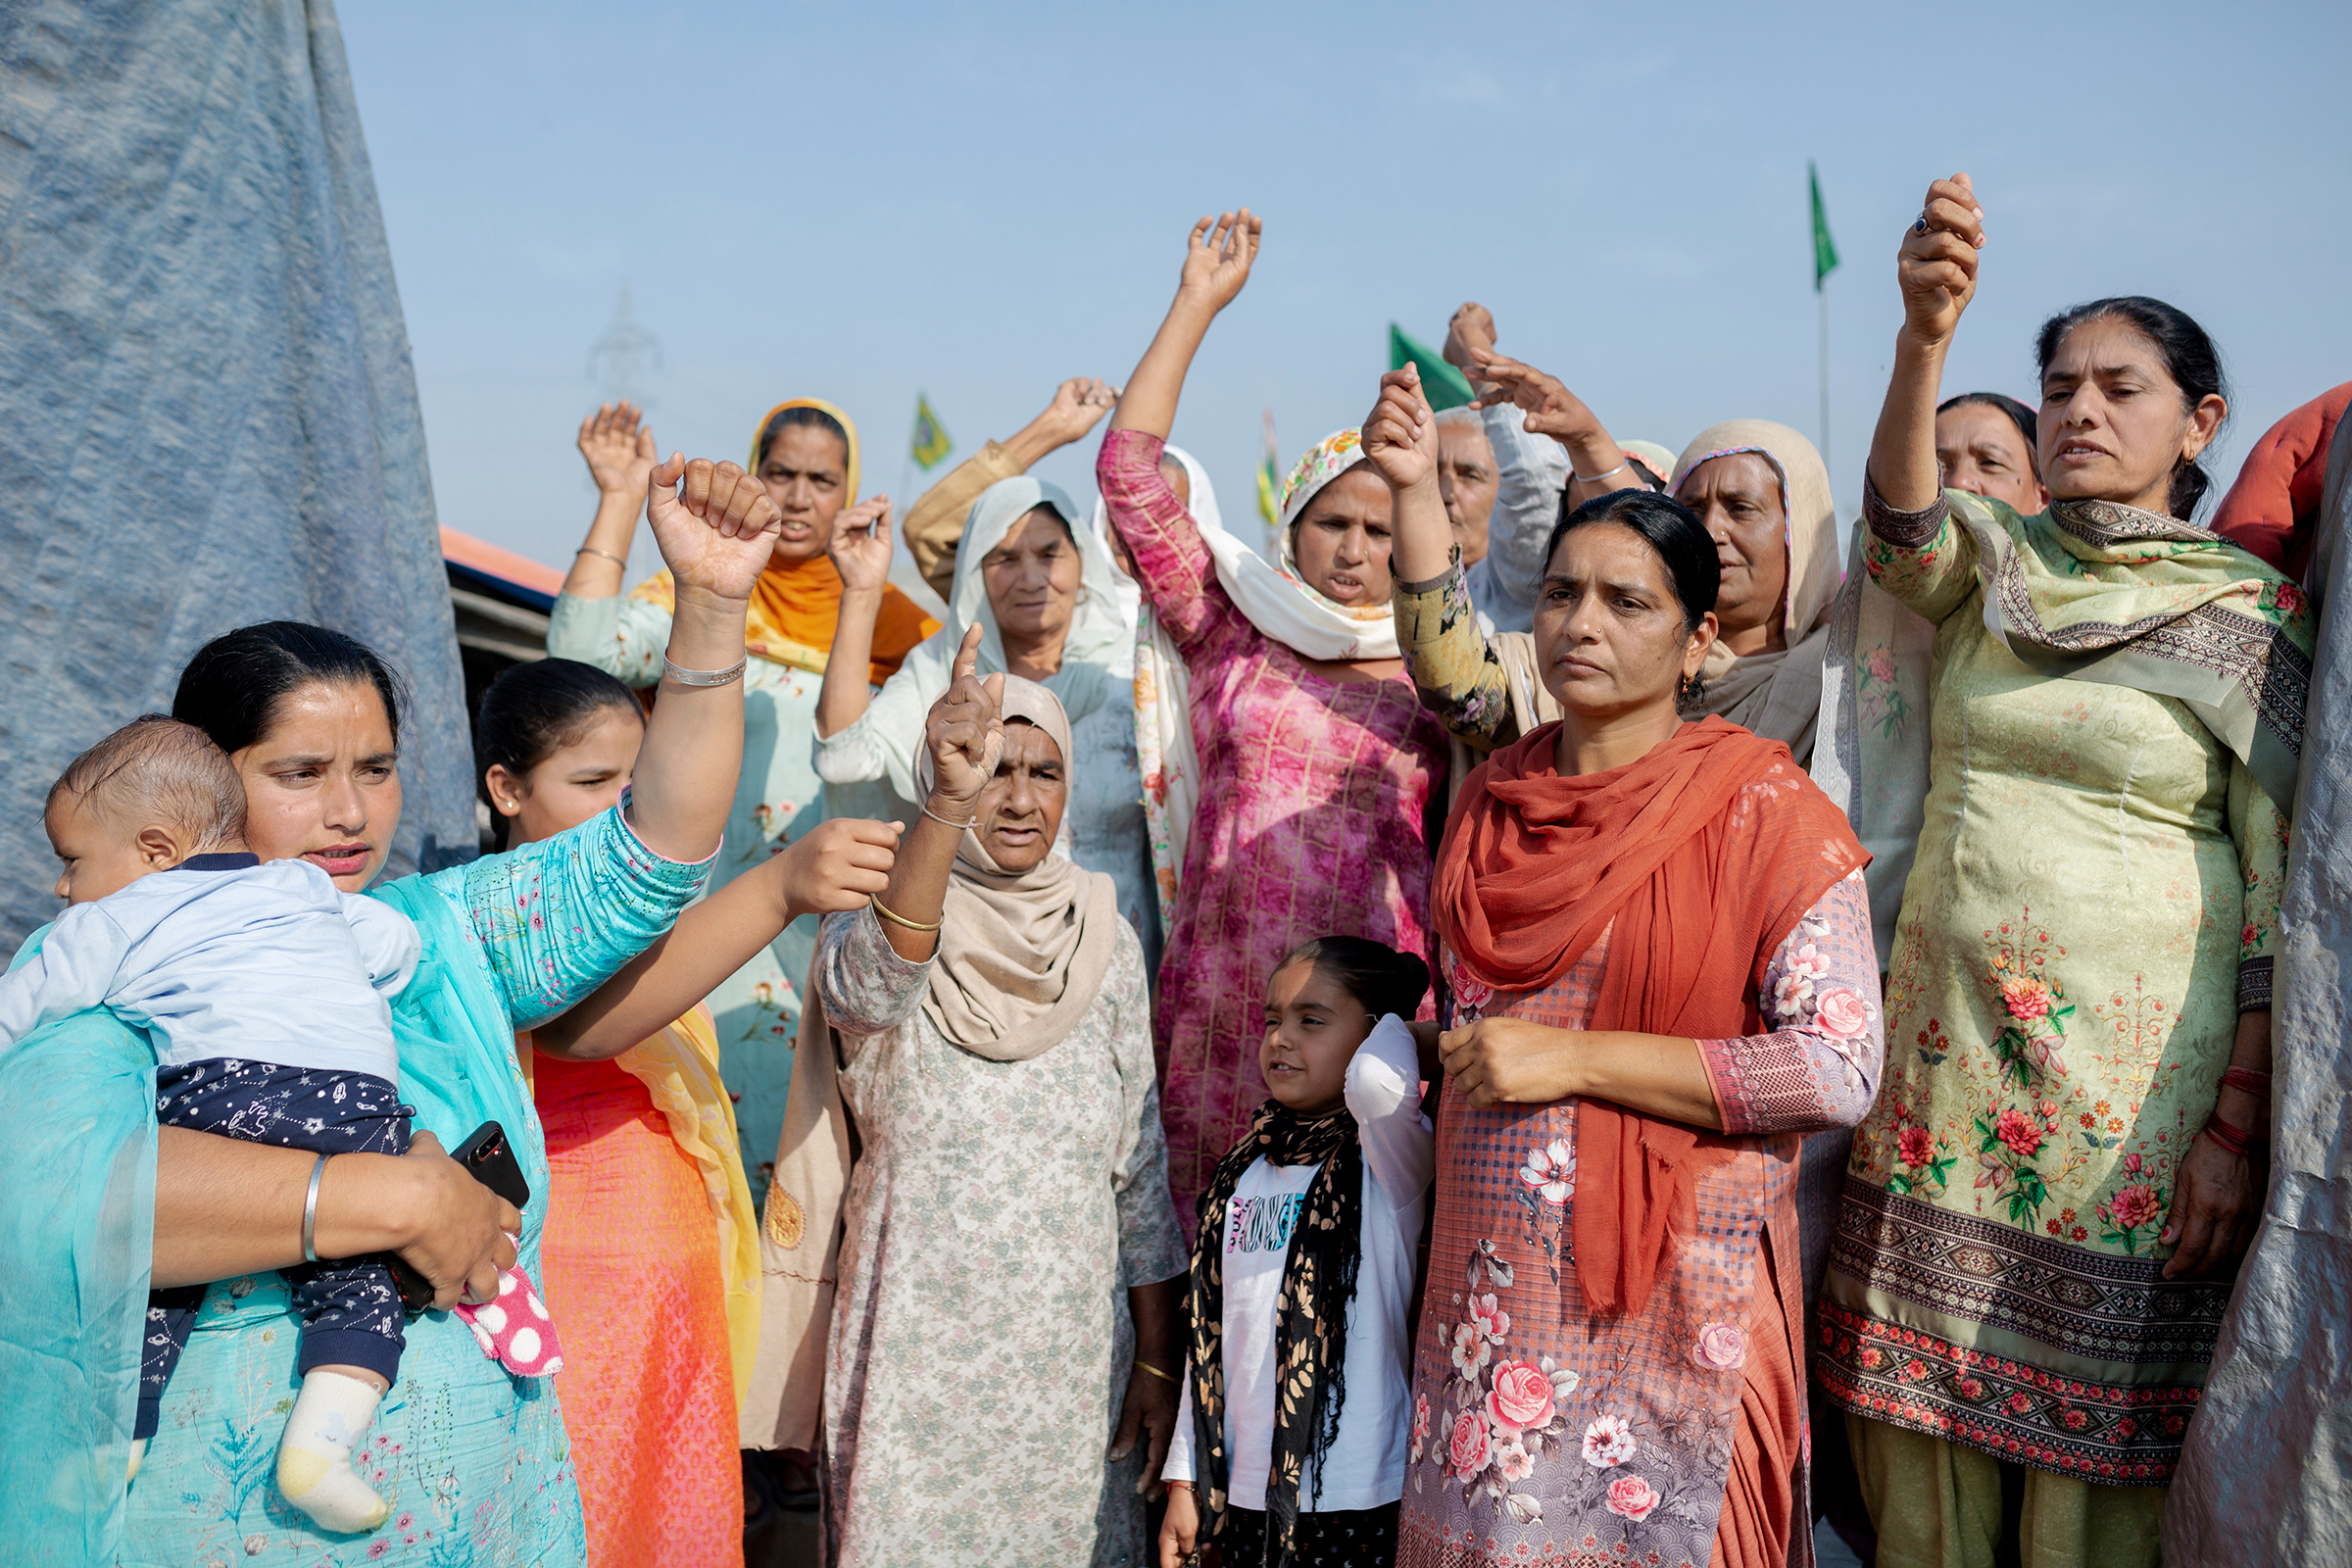 Beginning in November 2020, hundreds of thousands of protesters gathered at sites surrounding the Indian capital to demand the repeal of agricultural laws passed two months earlier by Indian Prime Minister Narendra Modi's government. Kiranjit Kaur, far left, came to the <a href=